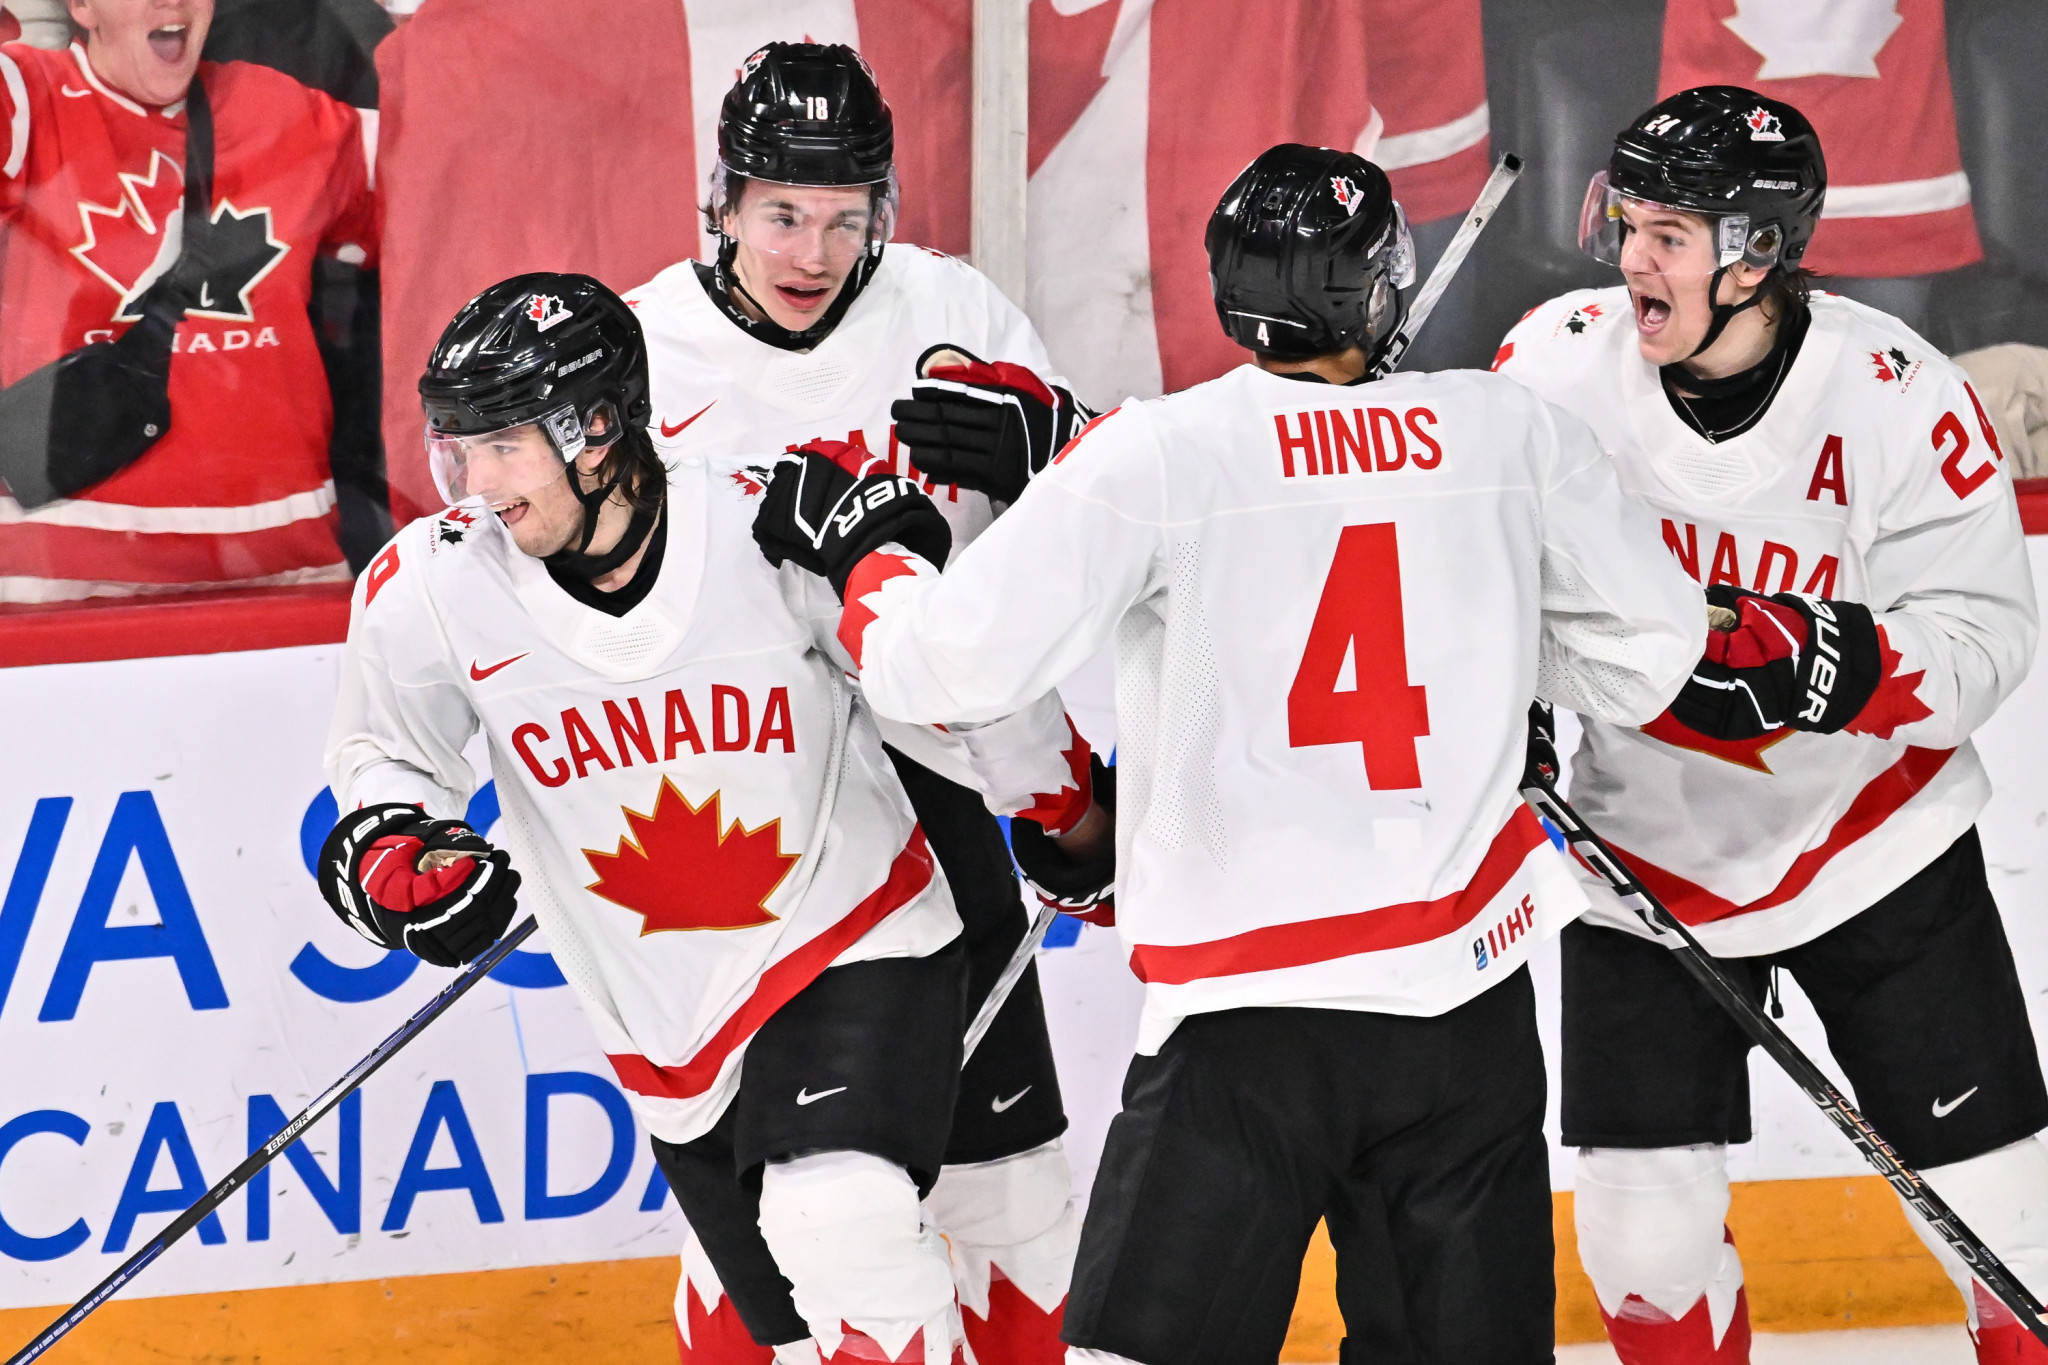 Hosts Canada, who were 2-0 down, recorded a stunning 6-2 comeback win to claim their spot in the final ©Getty Images